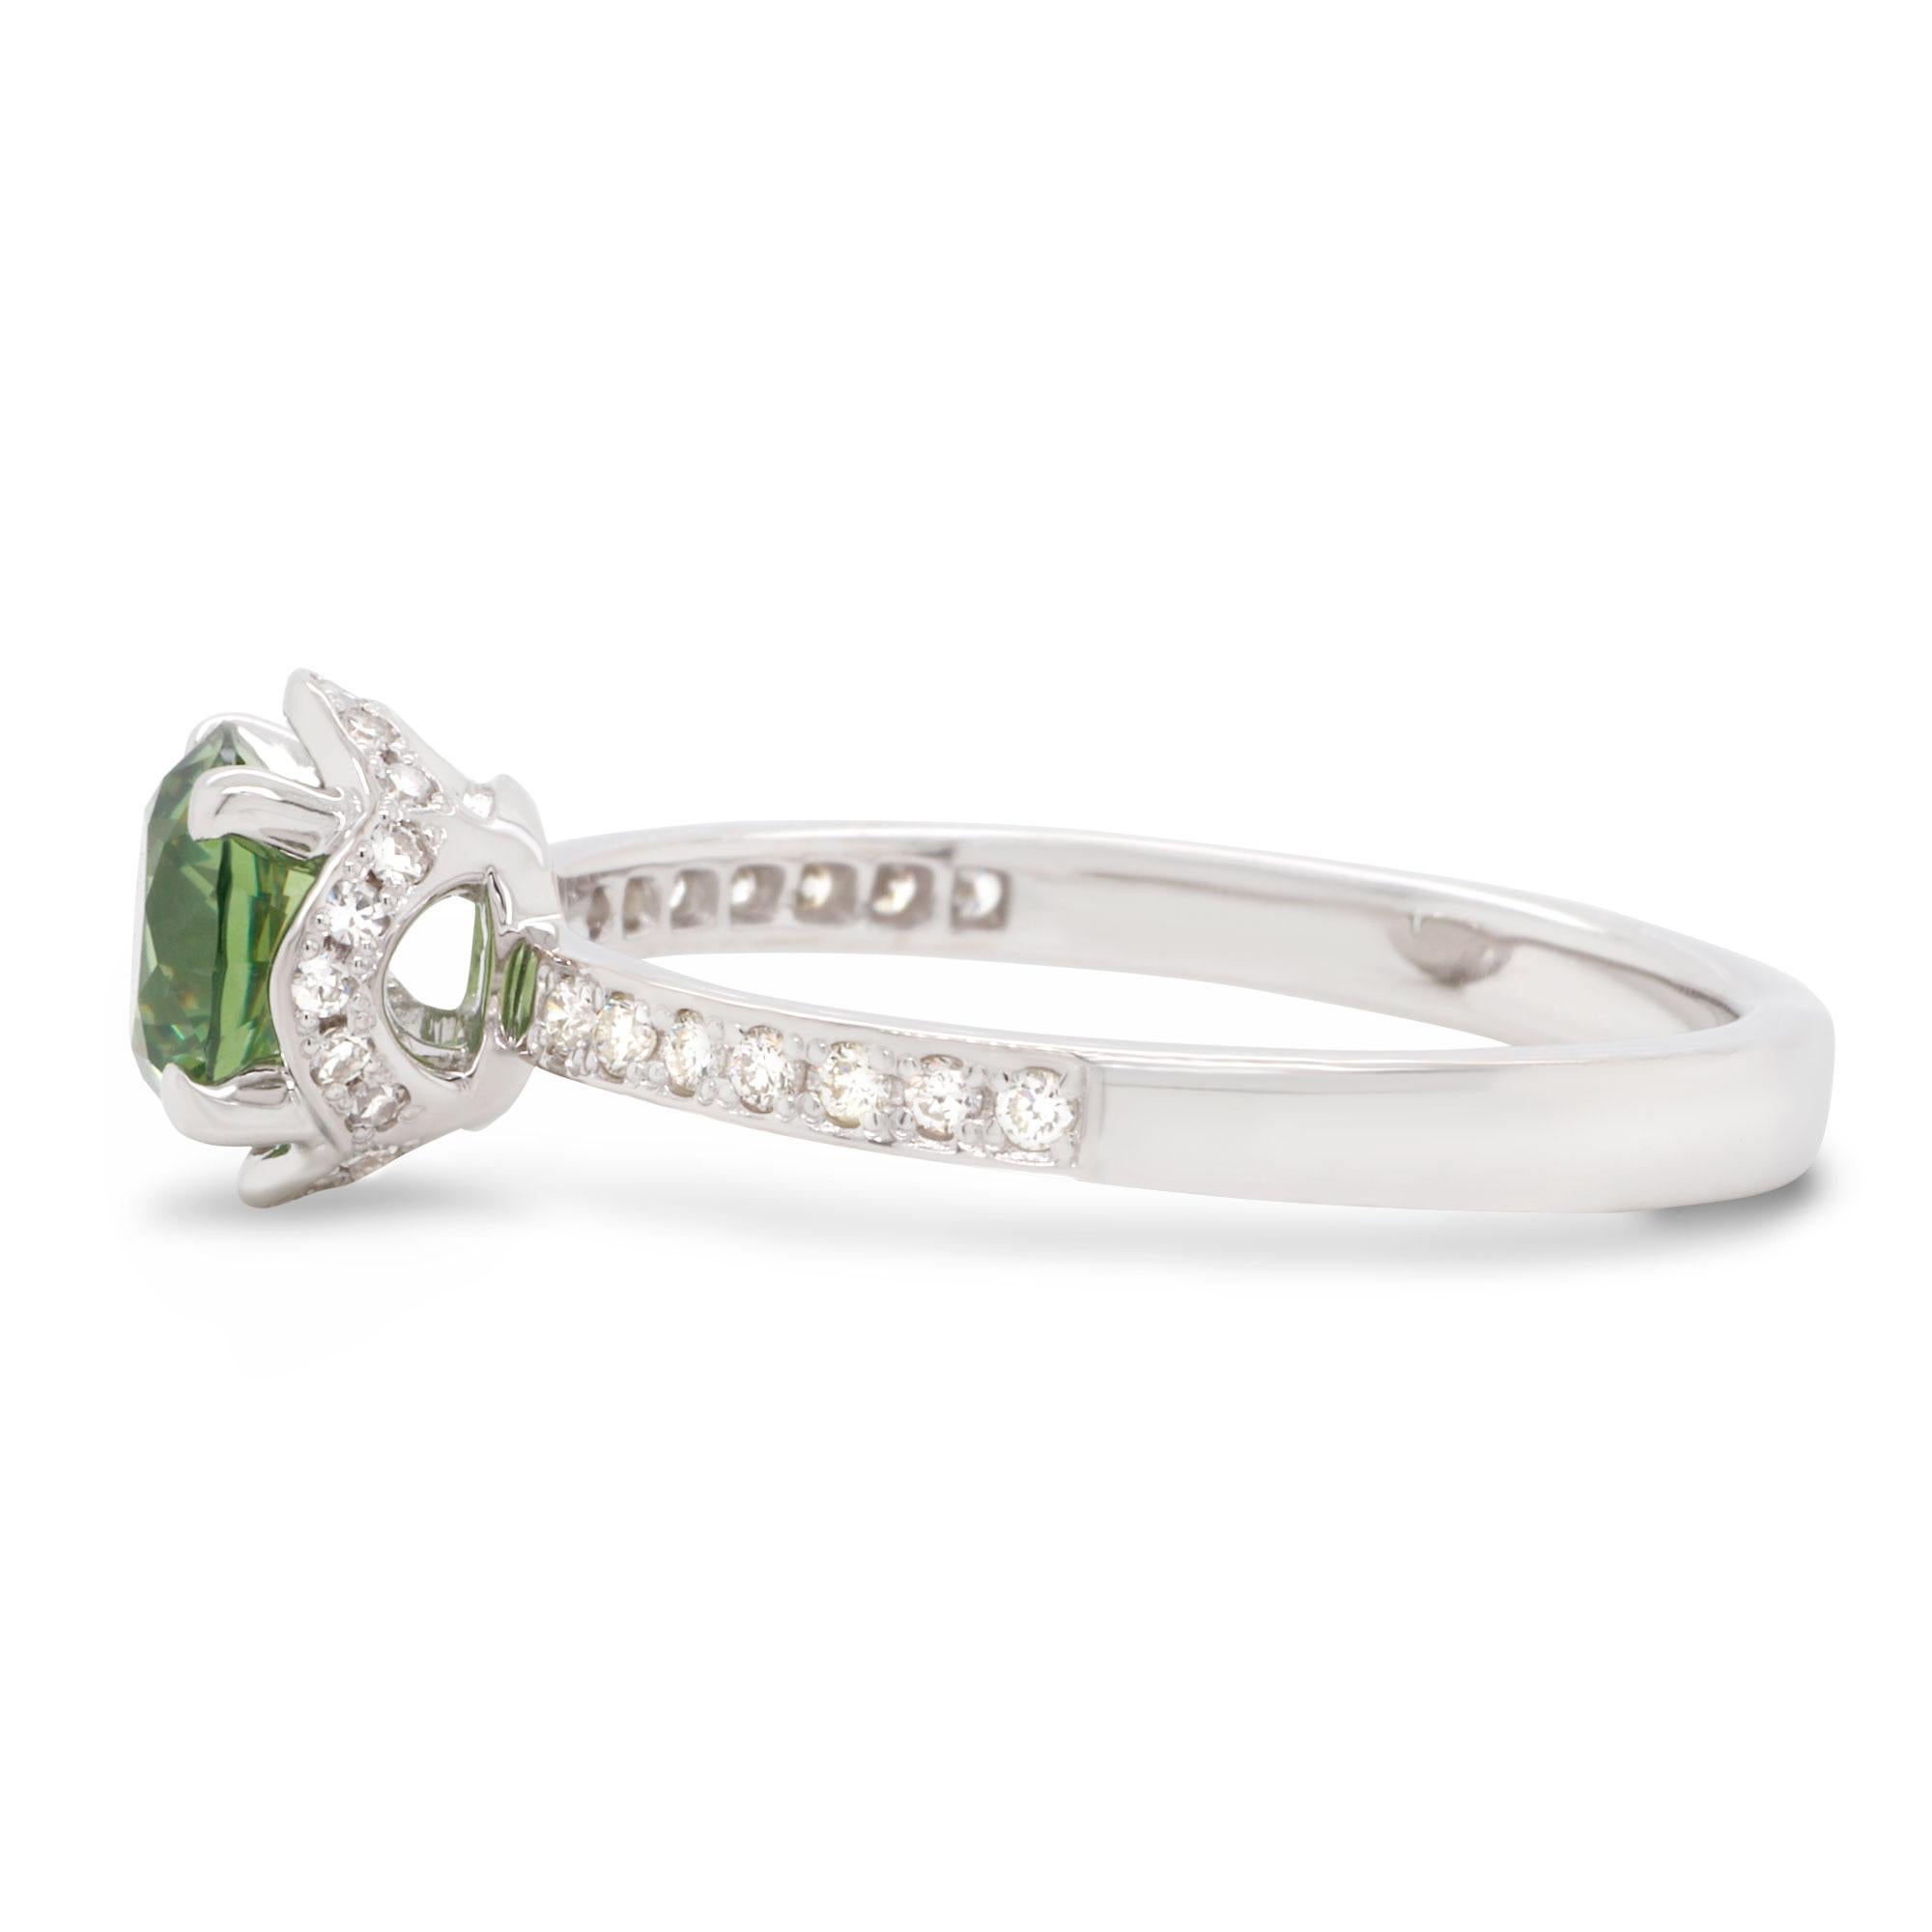 Sophisticated 14K White Gold Demantoid Ring with Diamonds. Featuring 1.14 ct of top quality Russian Demantoid combined with natural colorless diamonds 0.184 ct total weight. Simple but yet elegant design makes this ring perfect for any occasion. You